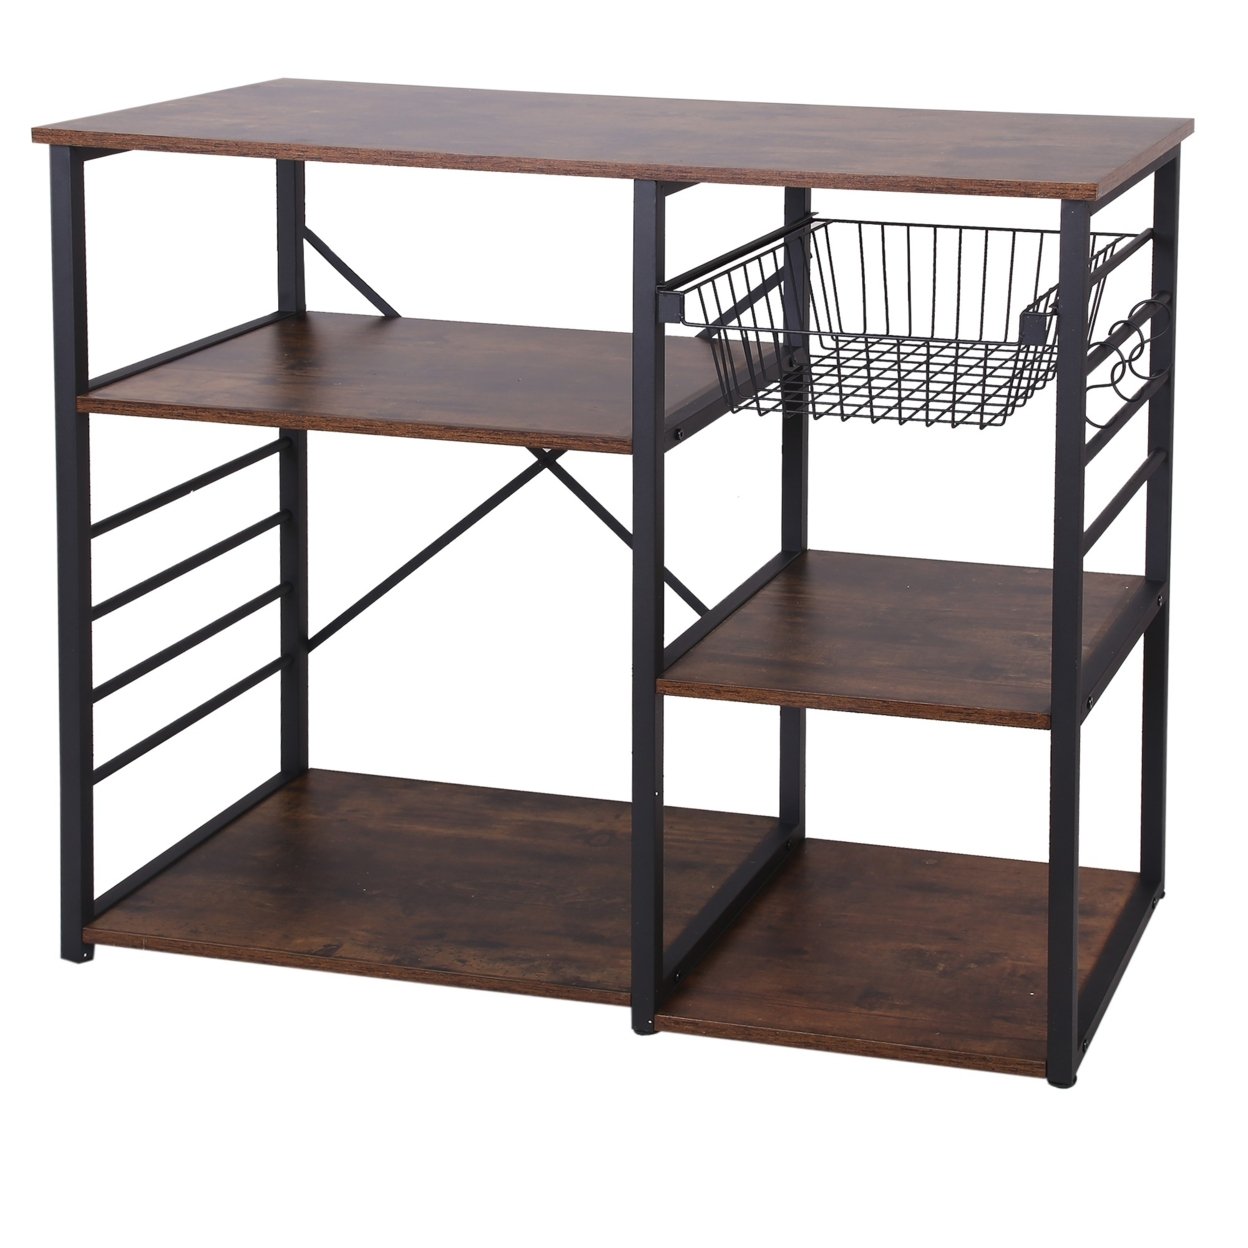 Wood and Metal Bakers Rack with 4 Shelves and Wire Basket, Brown and Black- Saltoro Sherpi